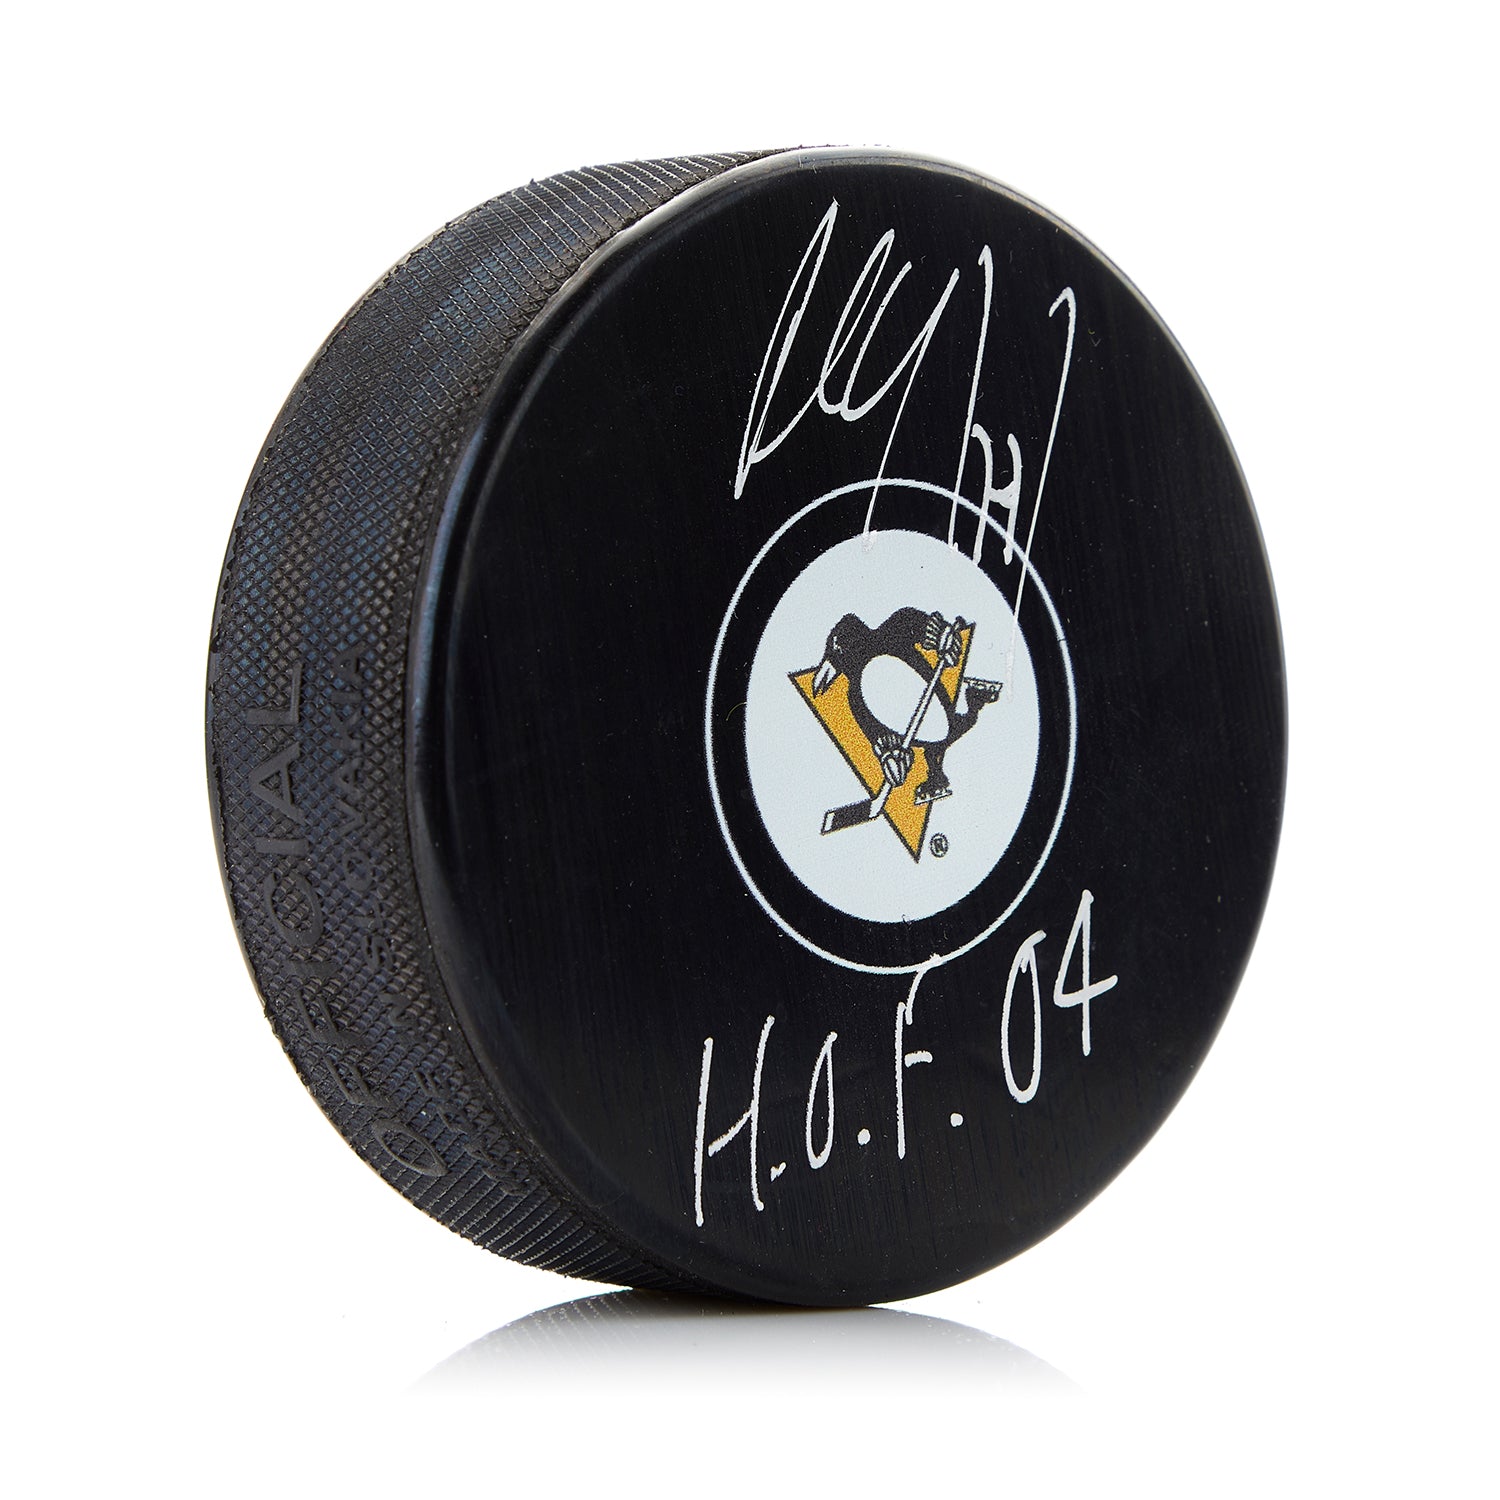 Paul Coffey Pittsburgh Penguins Signed Hockey Puck with HOF Note